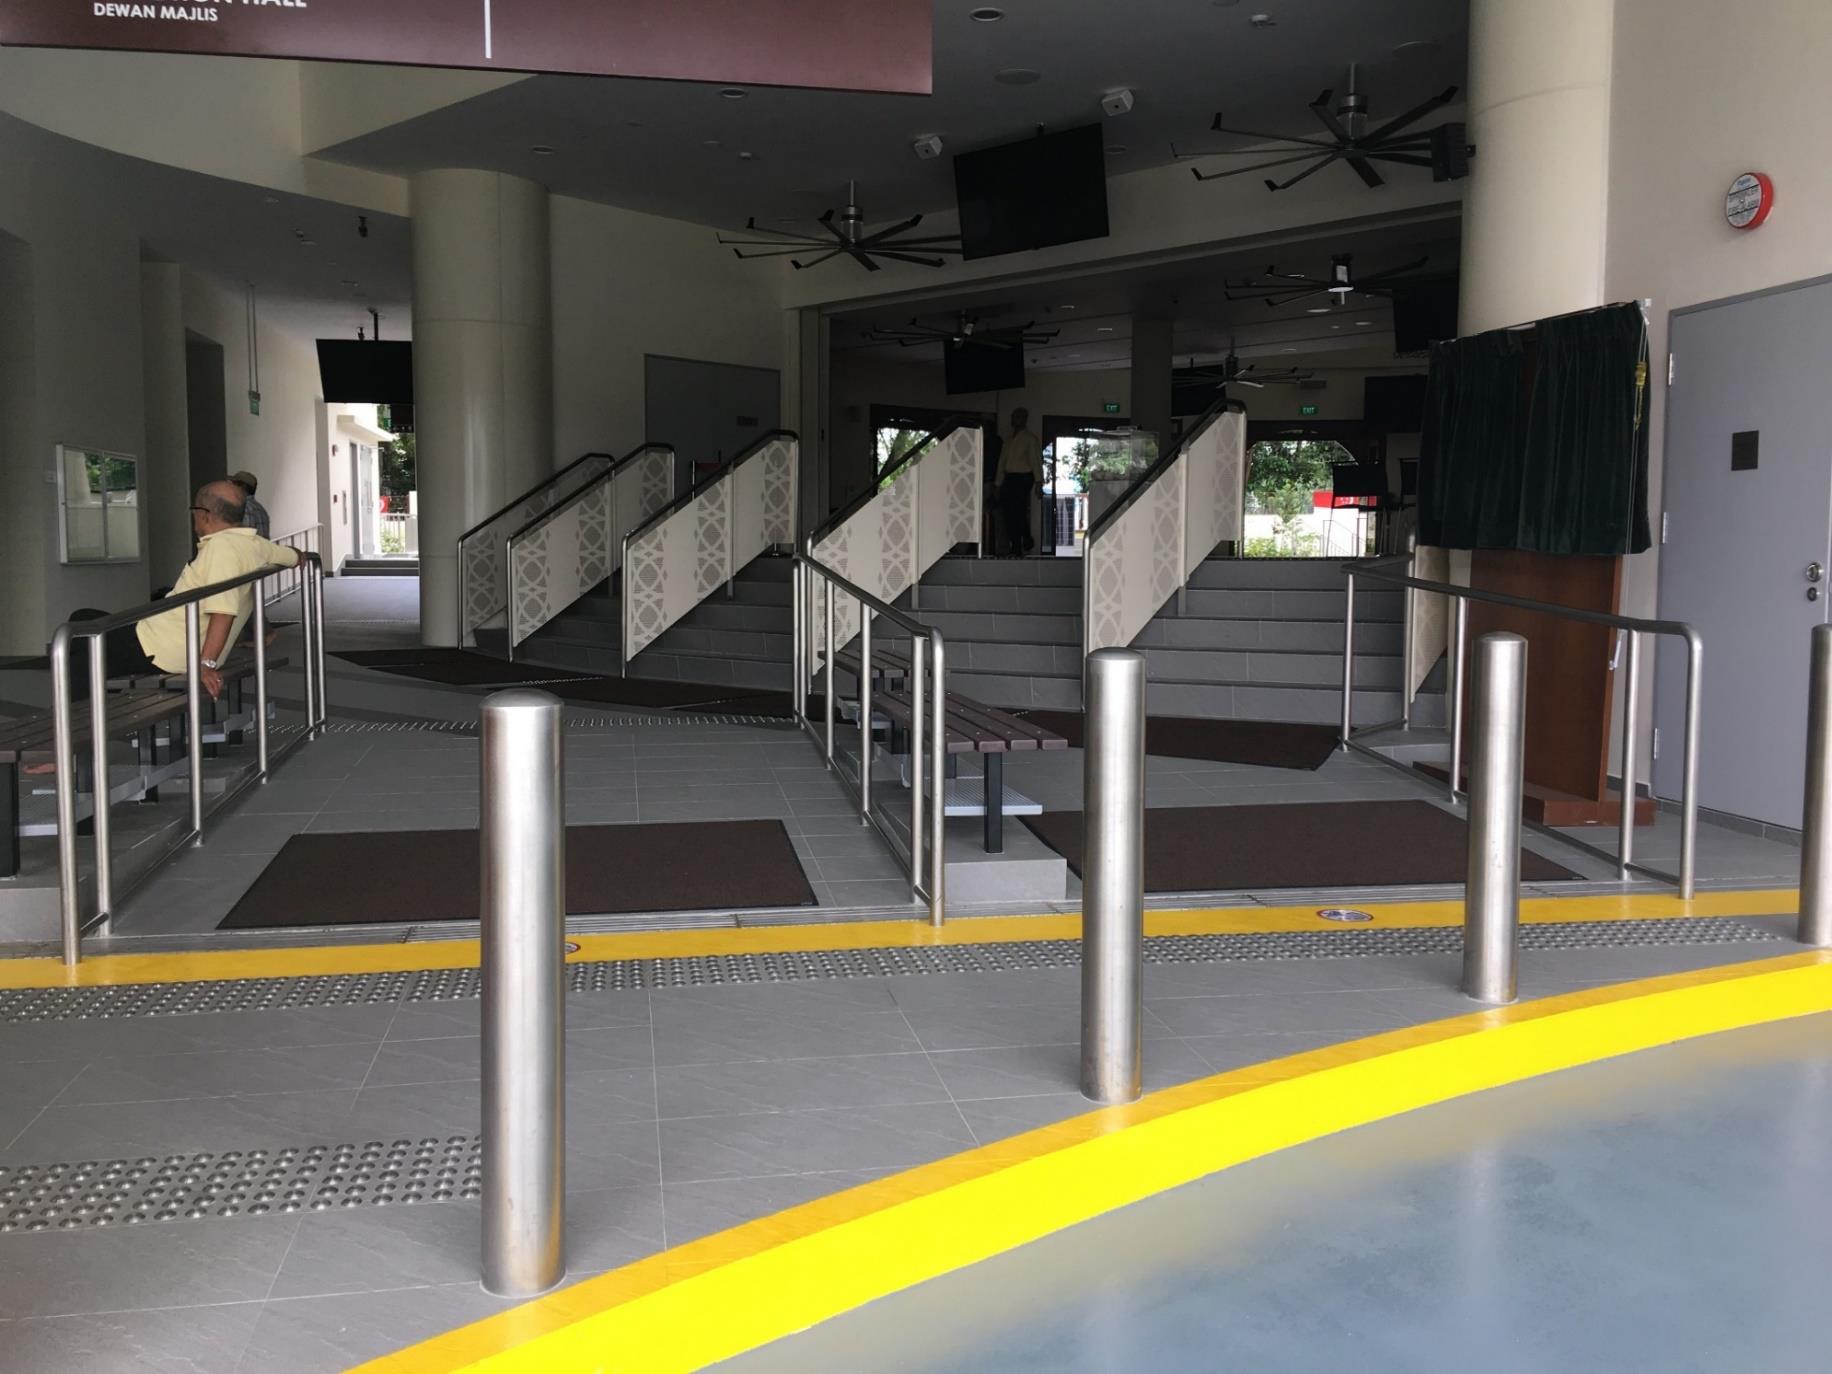 Singapore building with railings, dividers and bollards designed in stainless steel fabrication